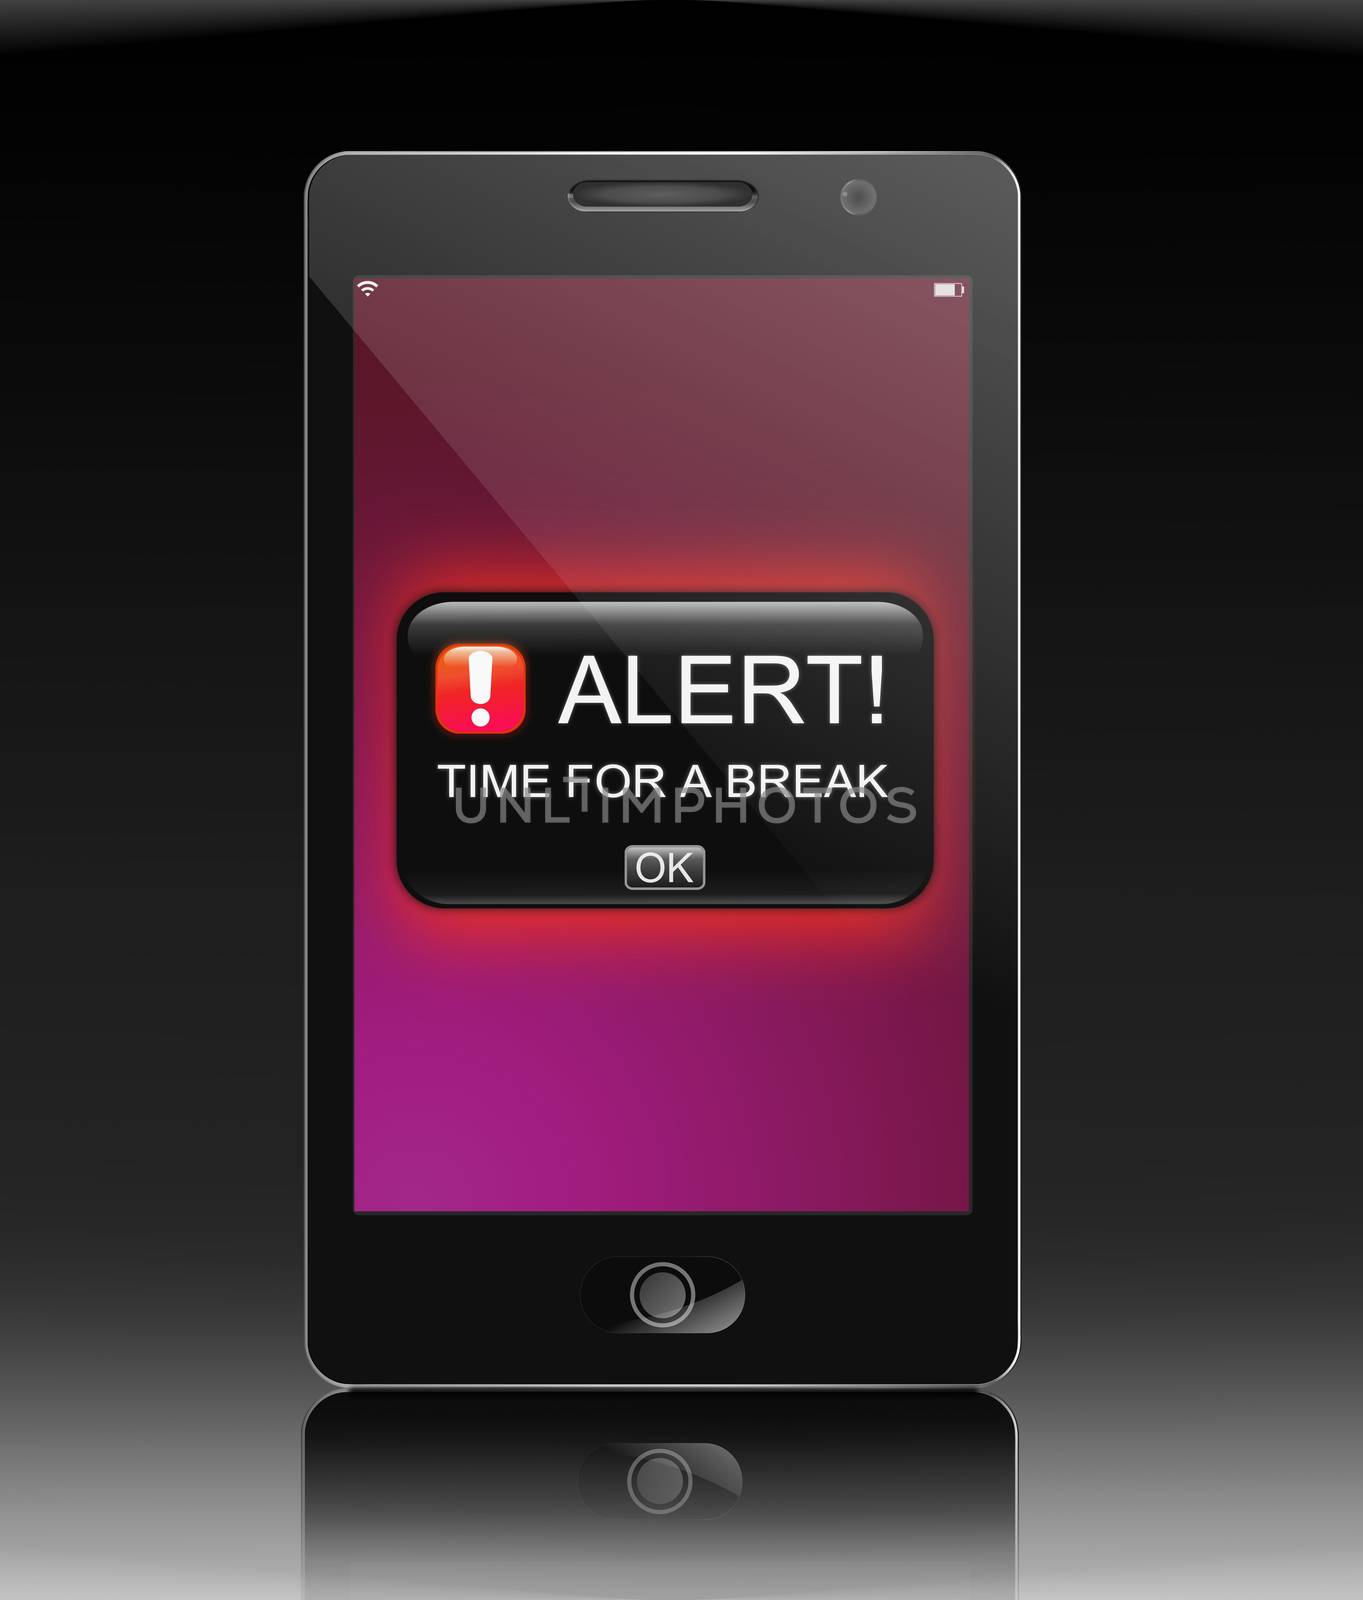 Illustration depicting a smartphone alert with a time for a break concept.